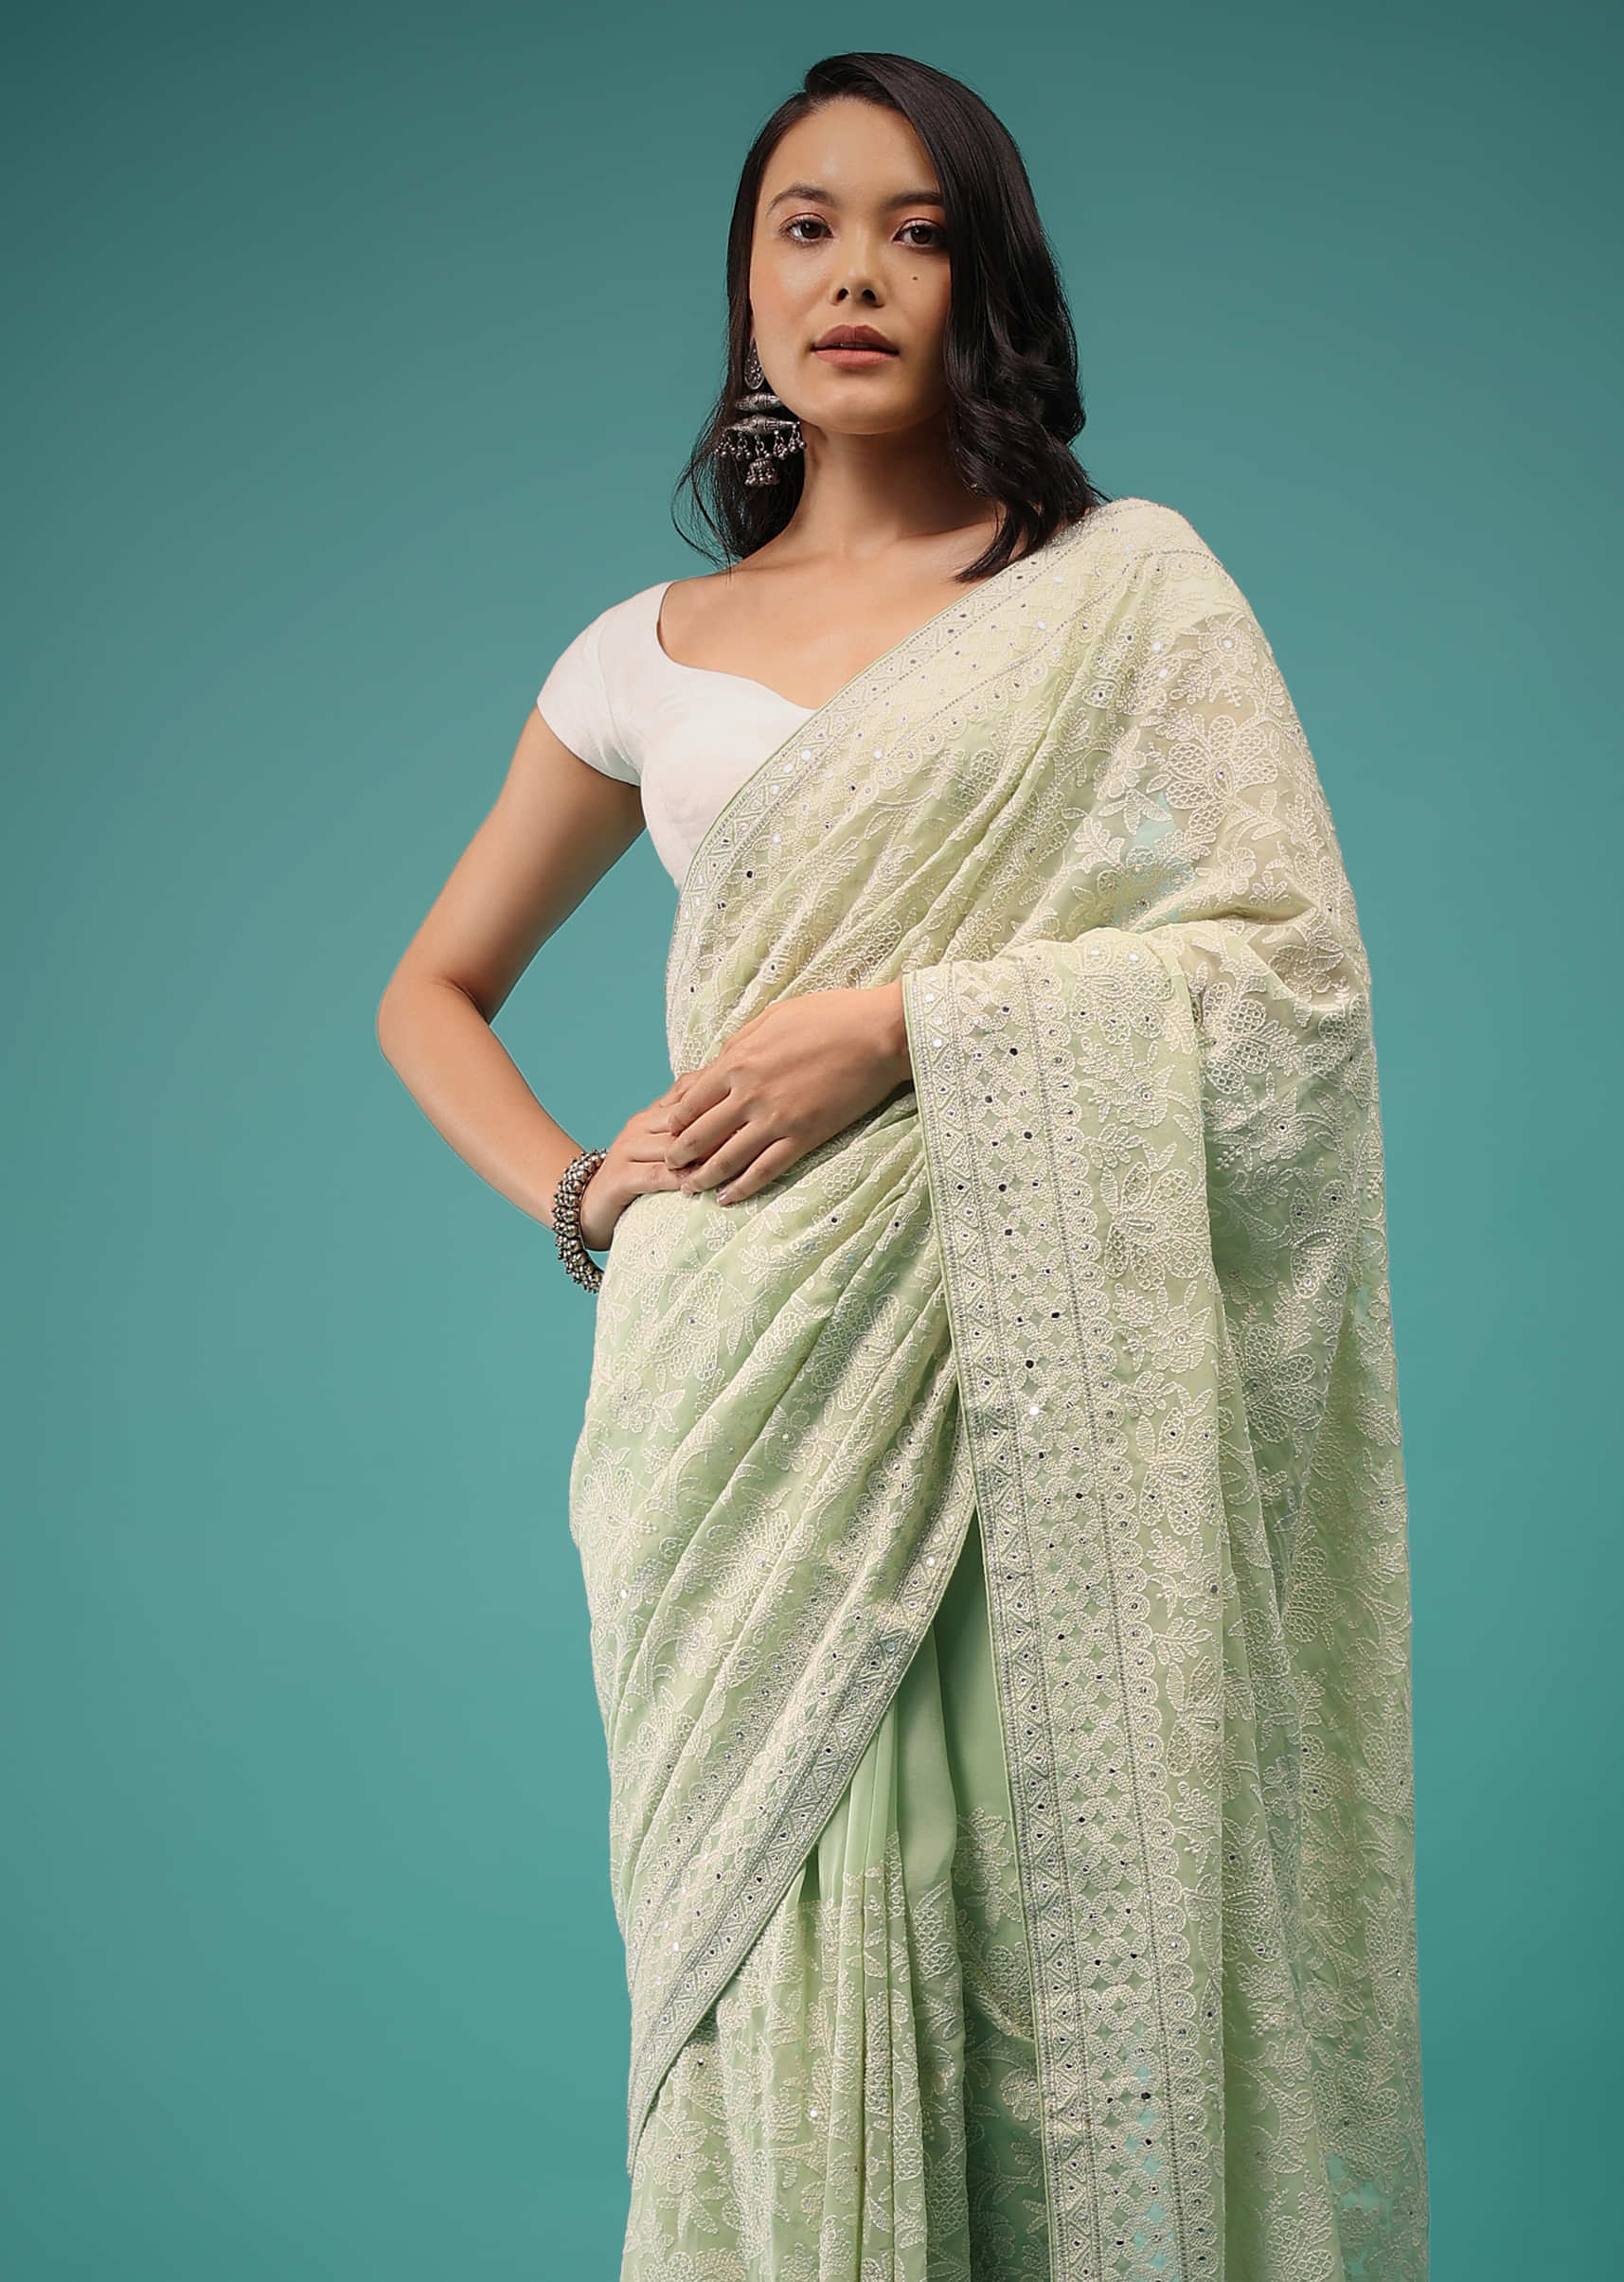 Pistachio Green Georgette Saree In Lucknowi Threadwork, Comes With Mirror Embroidery Detailing On The Border